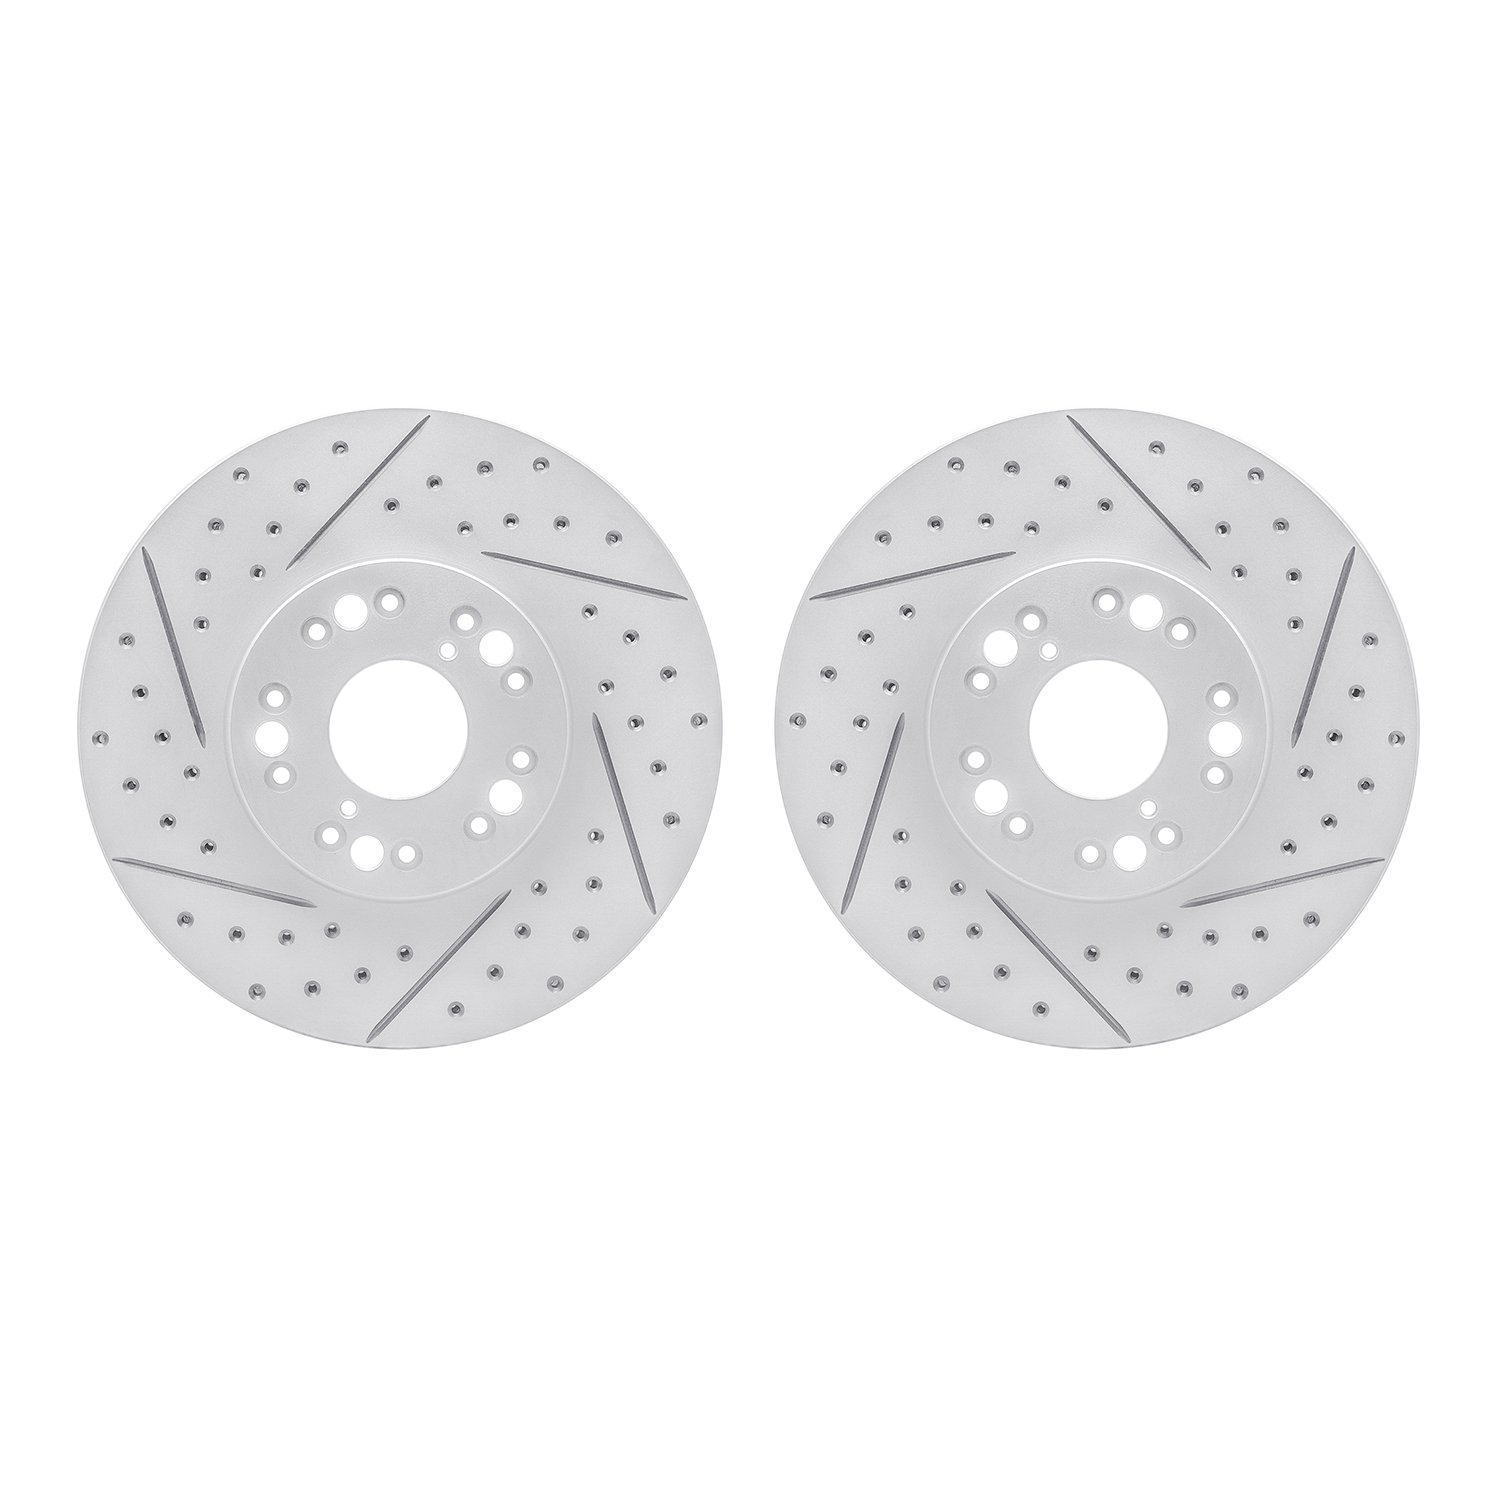 2002-75002 Geoperformance Drilled/Slotted Brake Rotors, 1992-2010 Lexus/Toyota/Scion, Position: Front